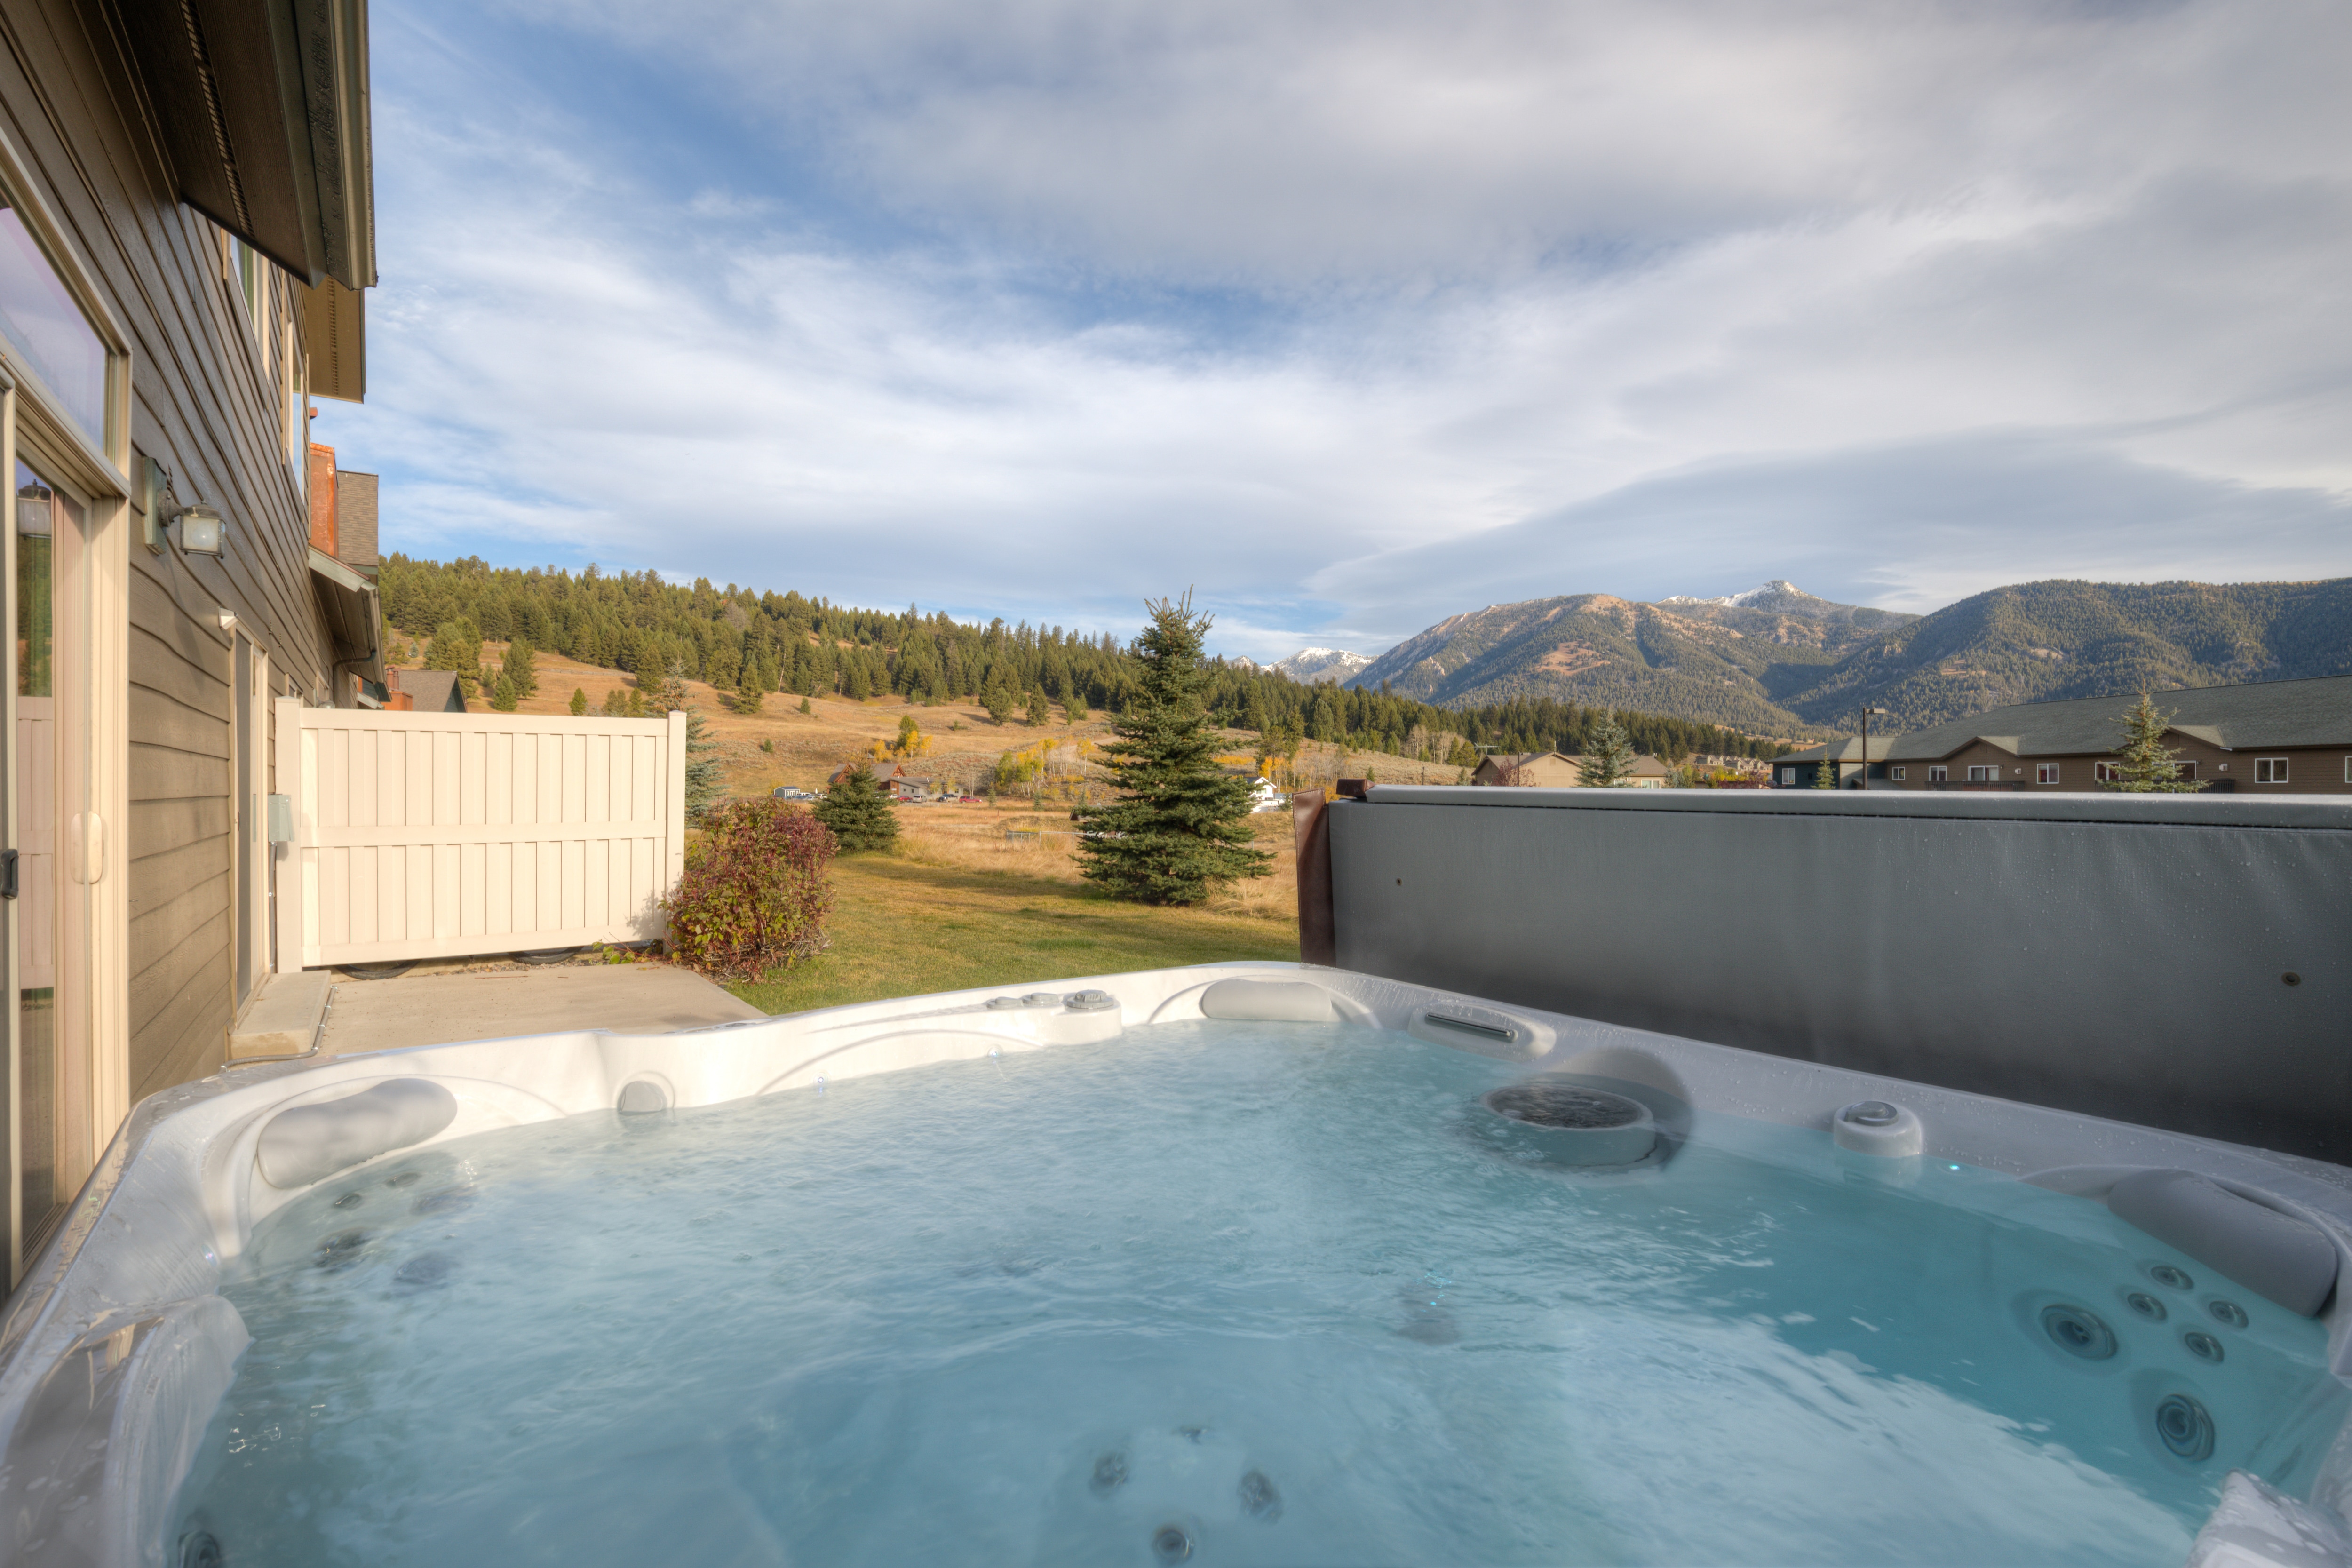 Have a glass of wine and unwind in the hot tub | Exterior